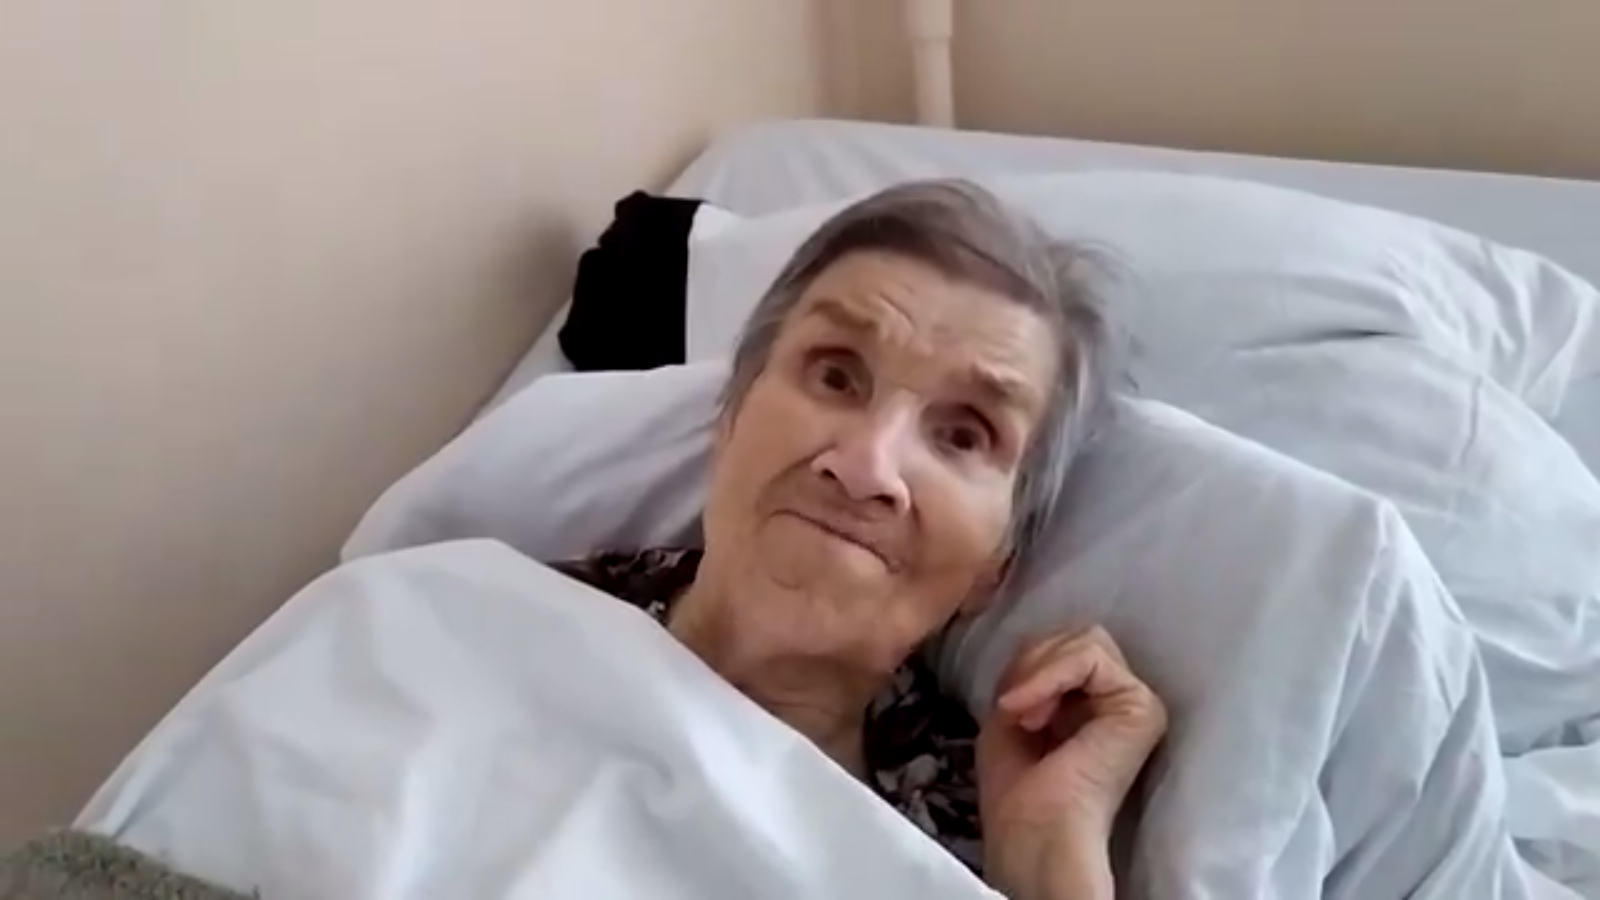 Video of the day: 100-year-old Masha found 92-year-old Vanya